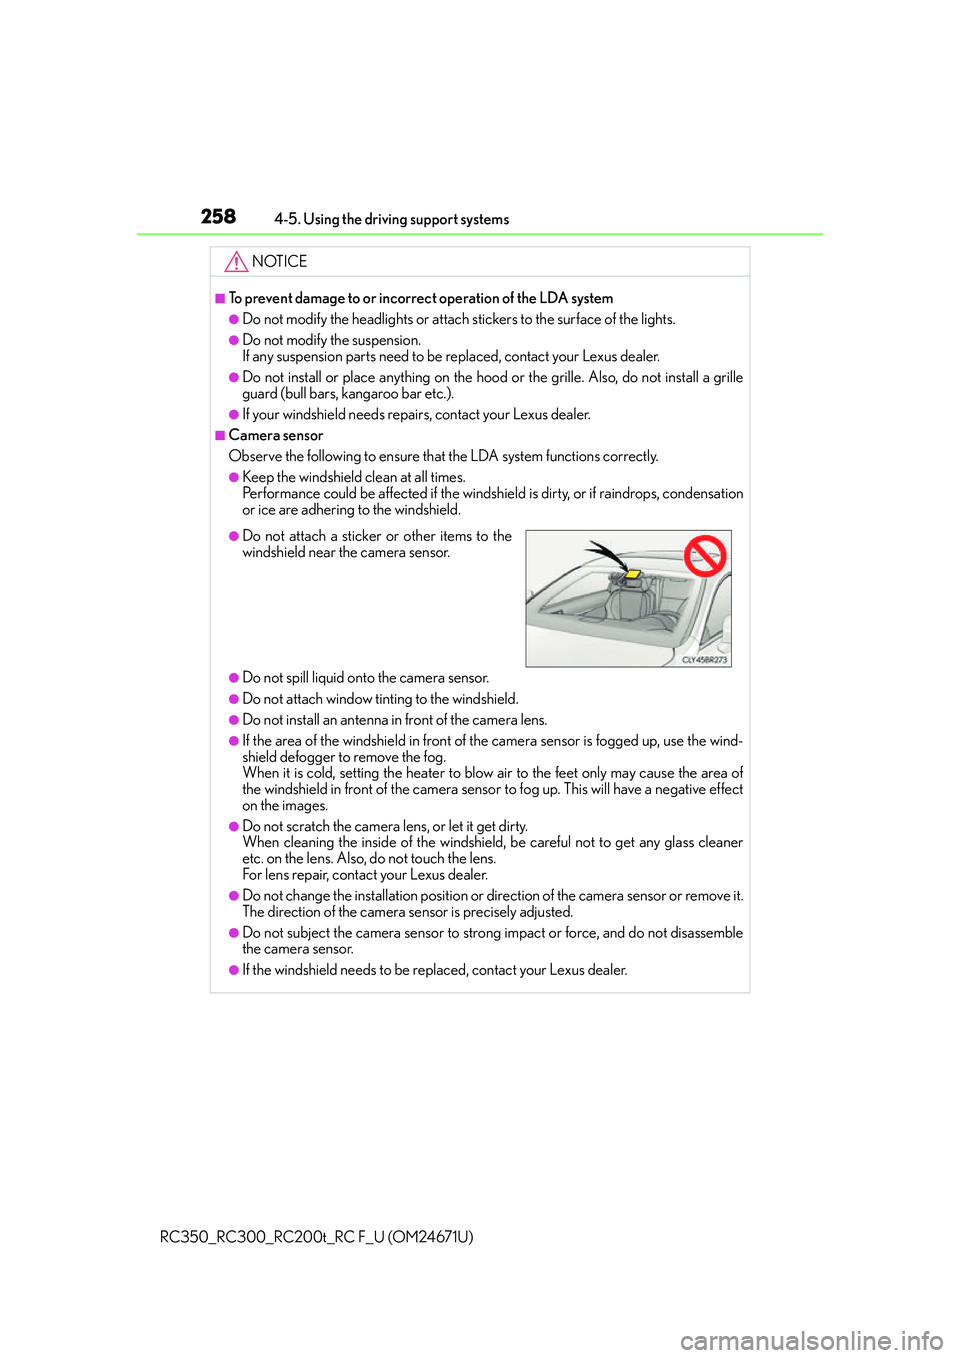 LEXUS RC F 2016  Owners Manual 2584-5. Using the driving support systems
RC350_RC300_RC200t_RC F_U (OM24671U)
NOTICE
■To prevent damage to or incorrect operation of the LDA system
●Do not modify the headlights or attach sticker